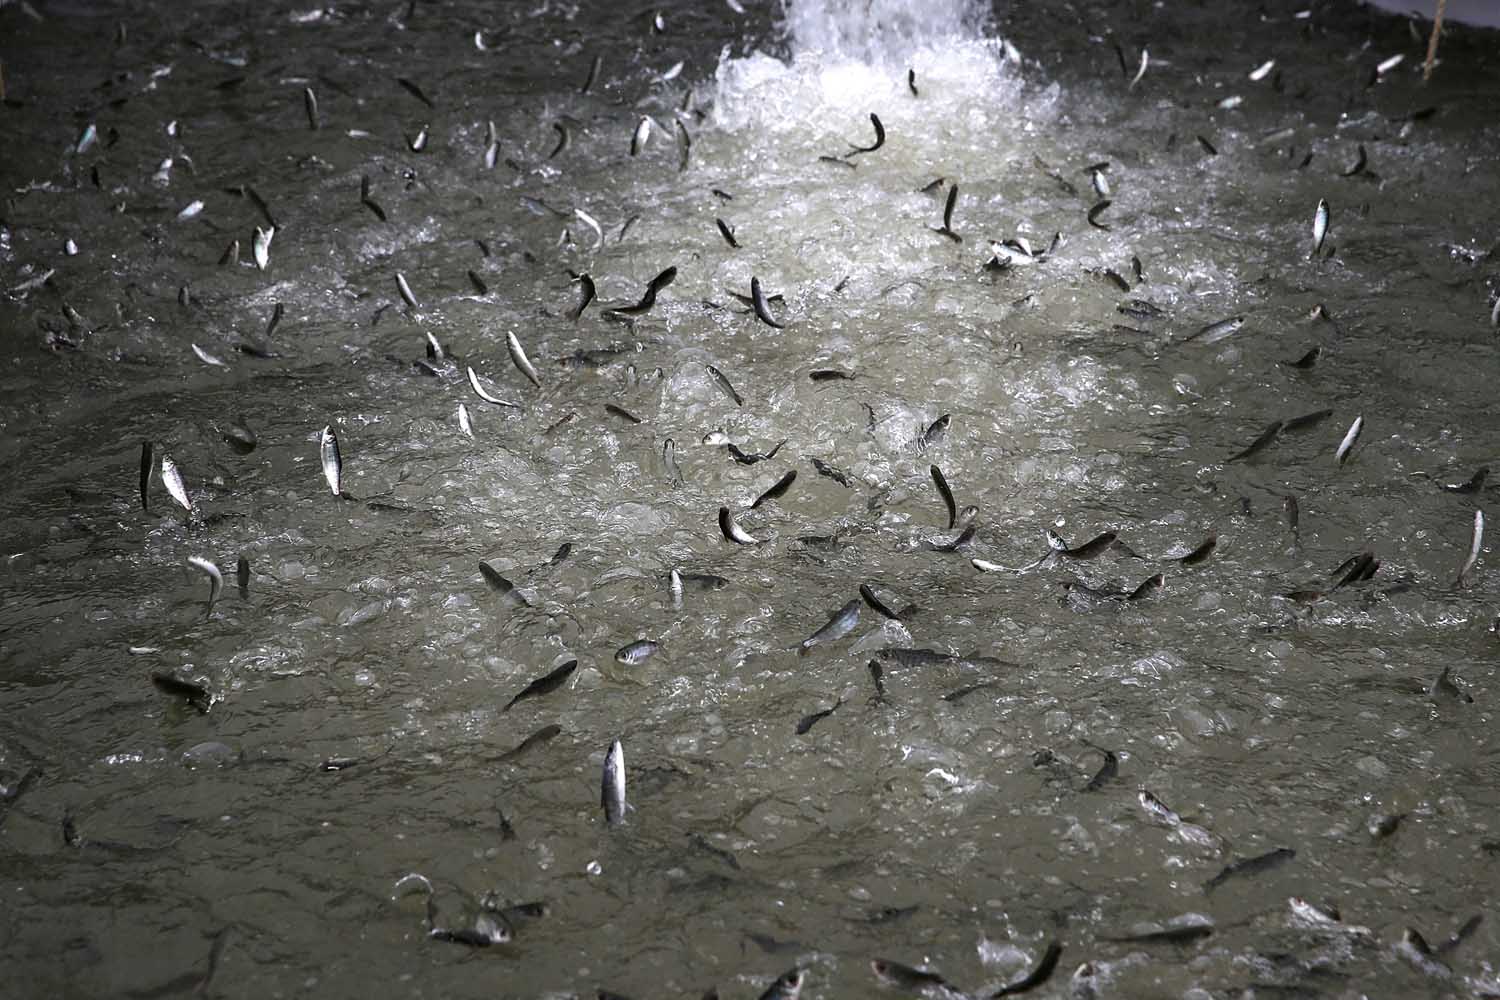 Mar. 25, 2014.  Fingerling Chinook salmon jump out of the water as they are dumped into a holding pen after being transfered from a truck into the Sacramento River in Rio Vista, California. As California continues to suffer through its worse drought in history, low water levels have forced wildlife officials to truck more than 400,000 salmon.